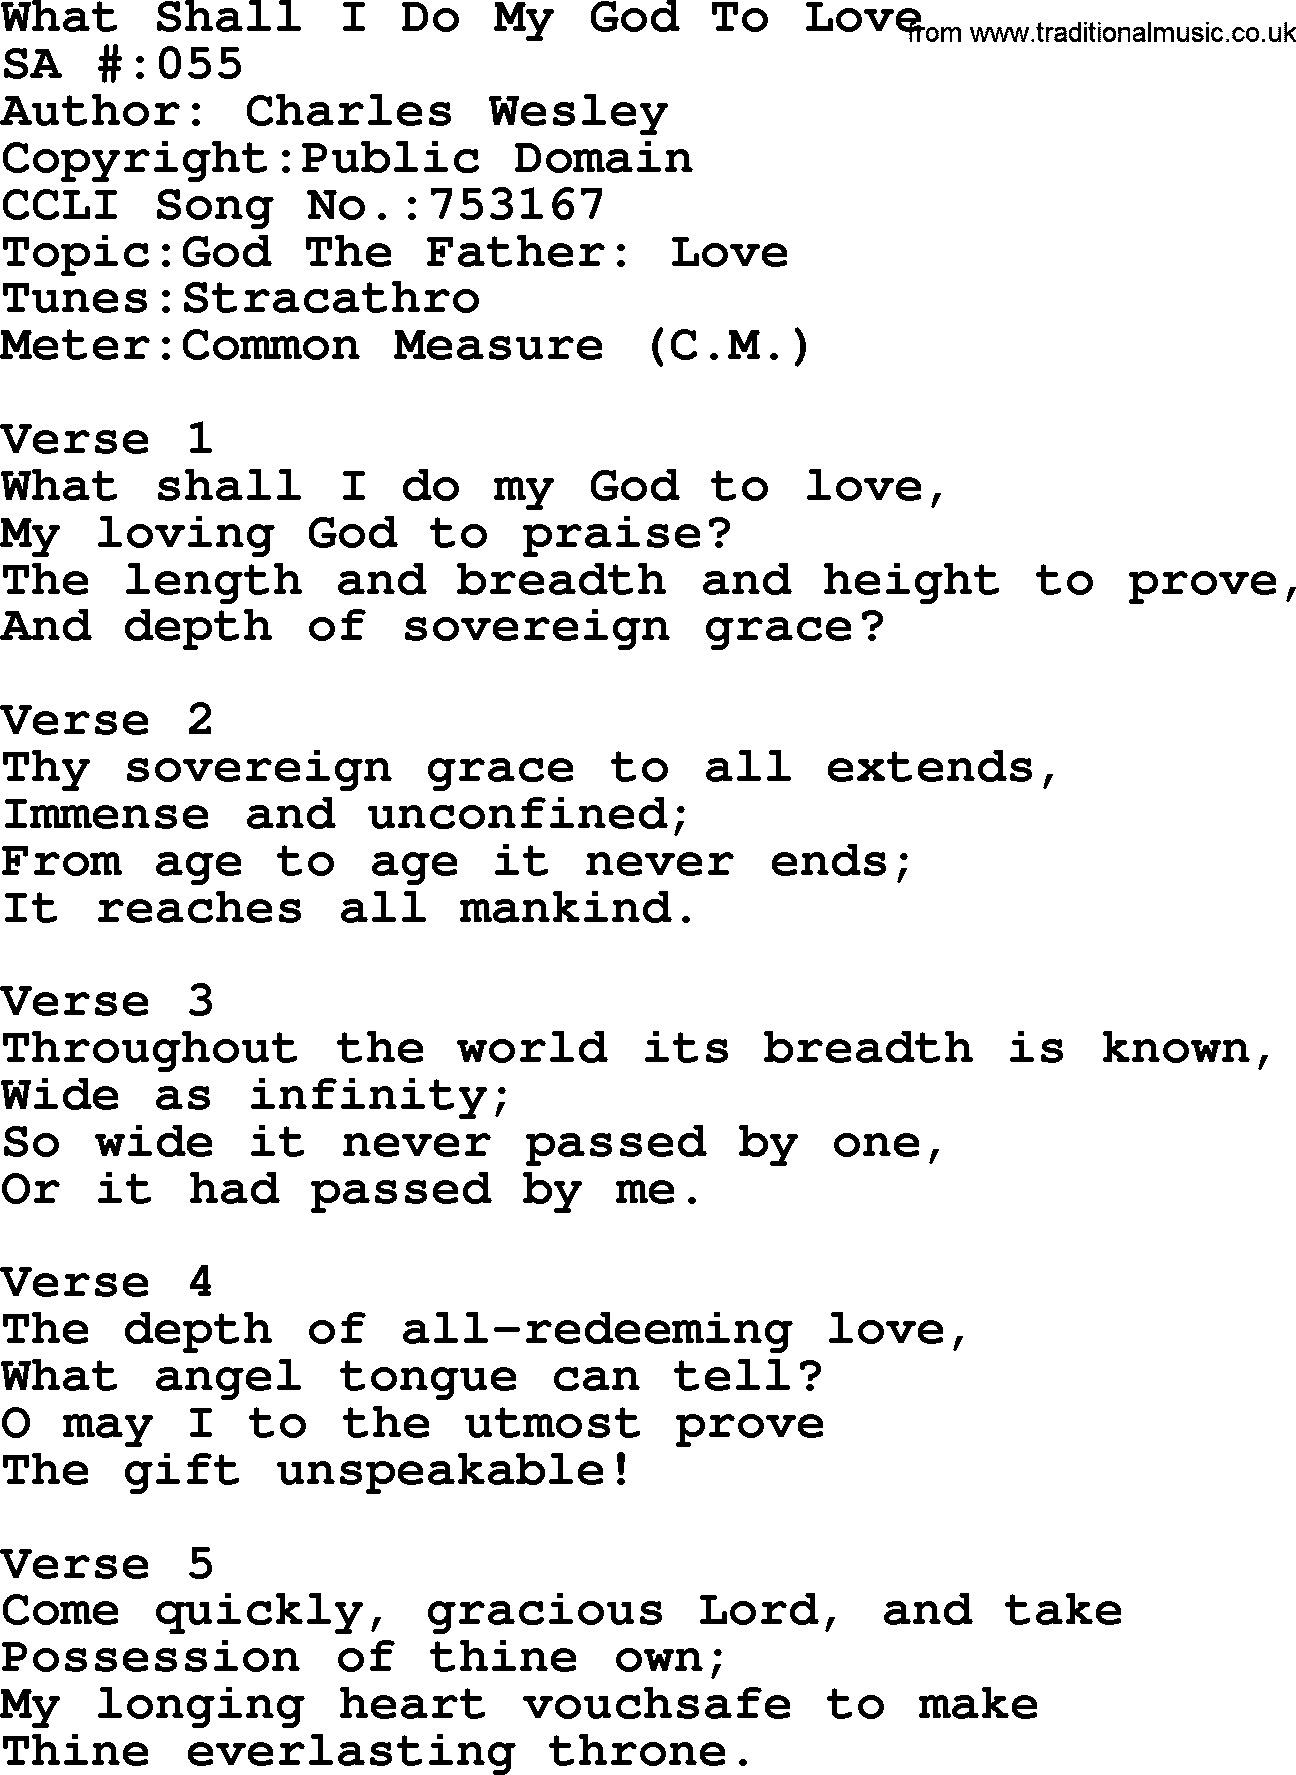 Salvation Army Hymnal, title: What Shall I Do My God To Love, with lyrics and PDF,